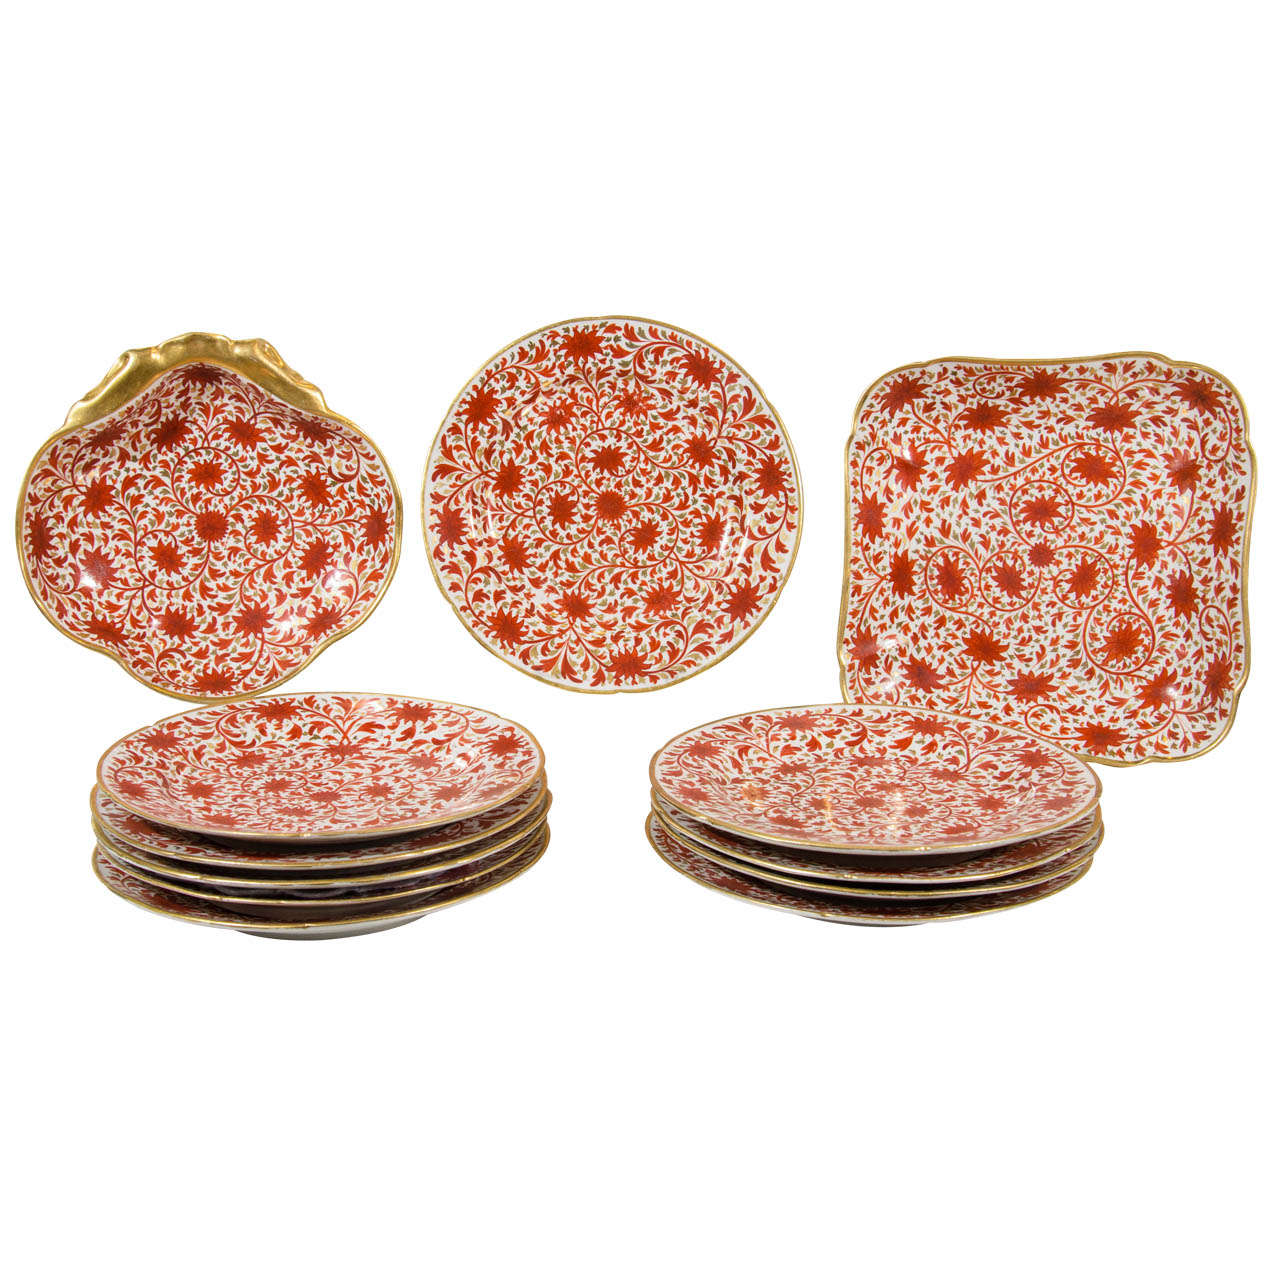 A Set of Dishes: An Extensive Service Coalport "Chrysanthemum" Pattern Dishes